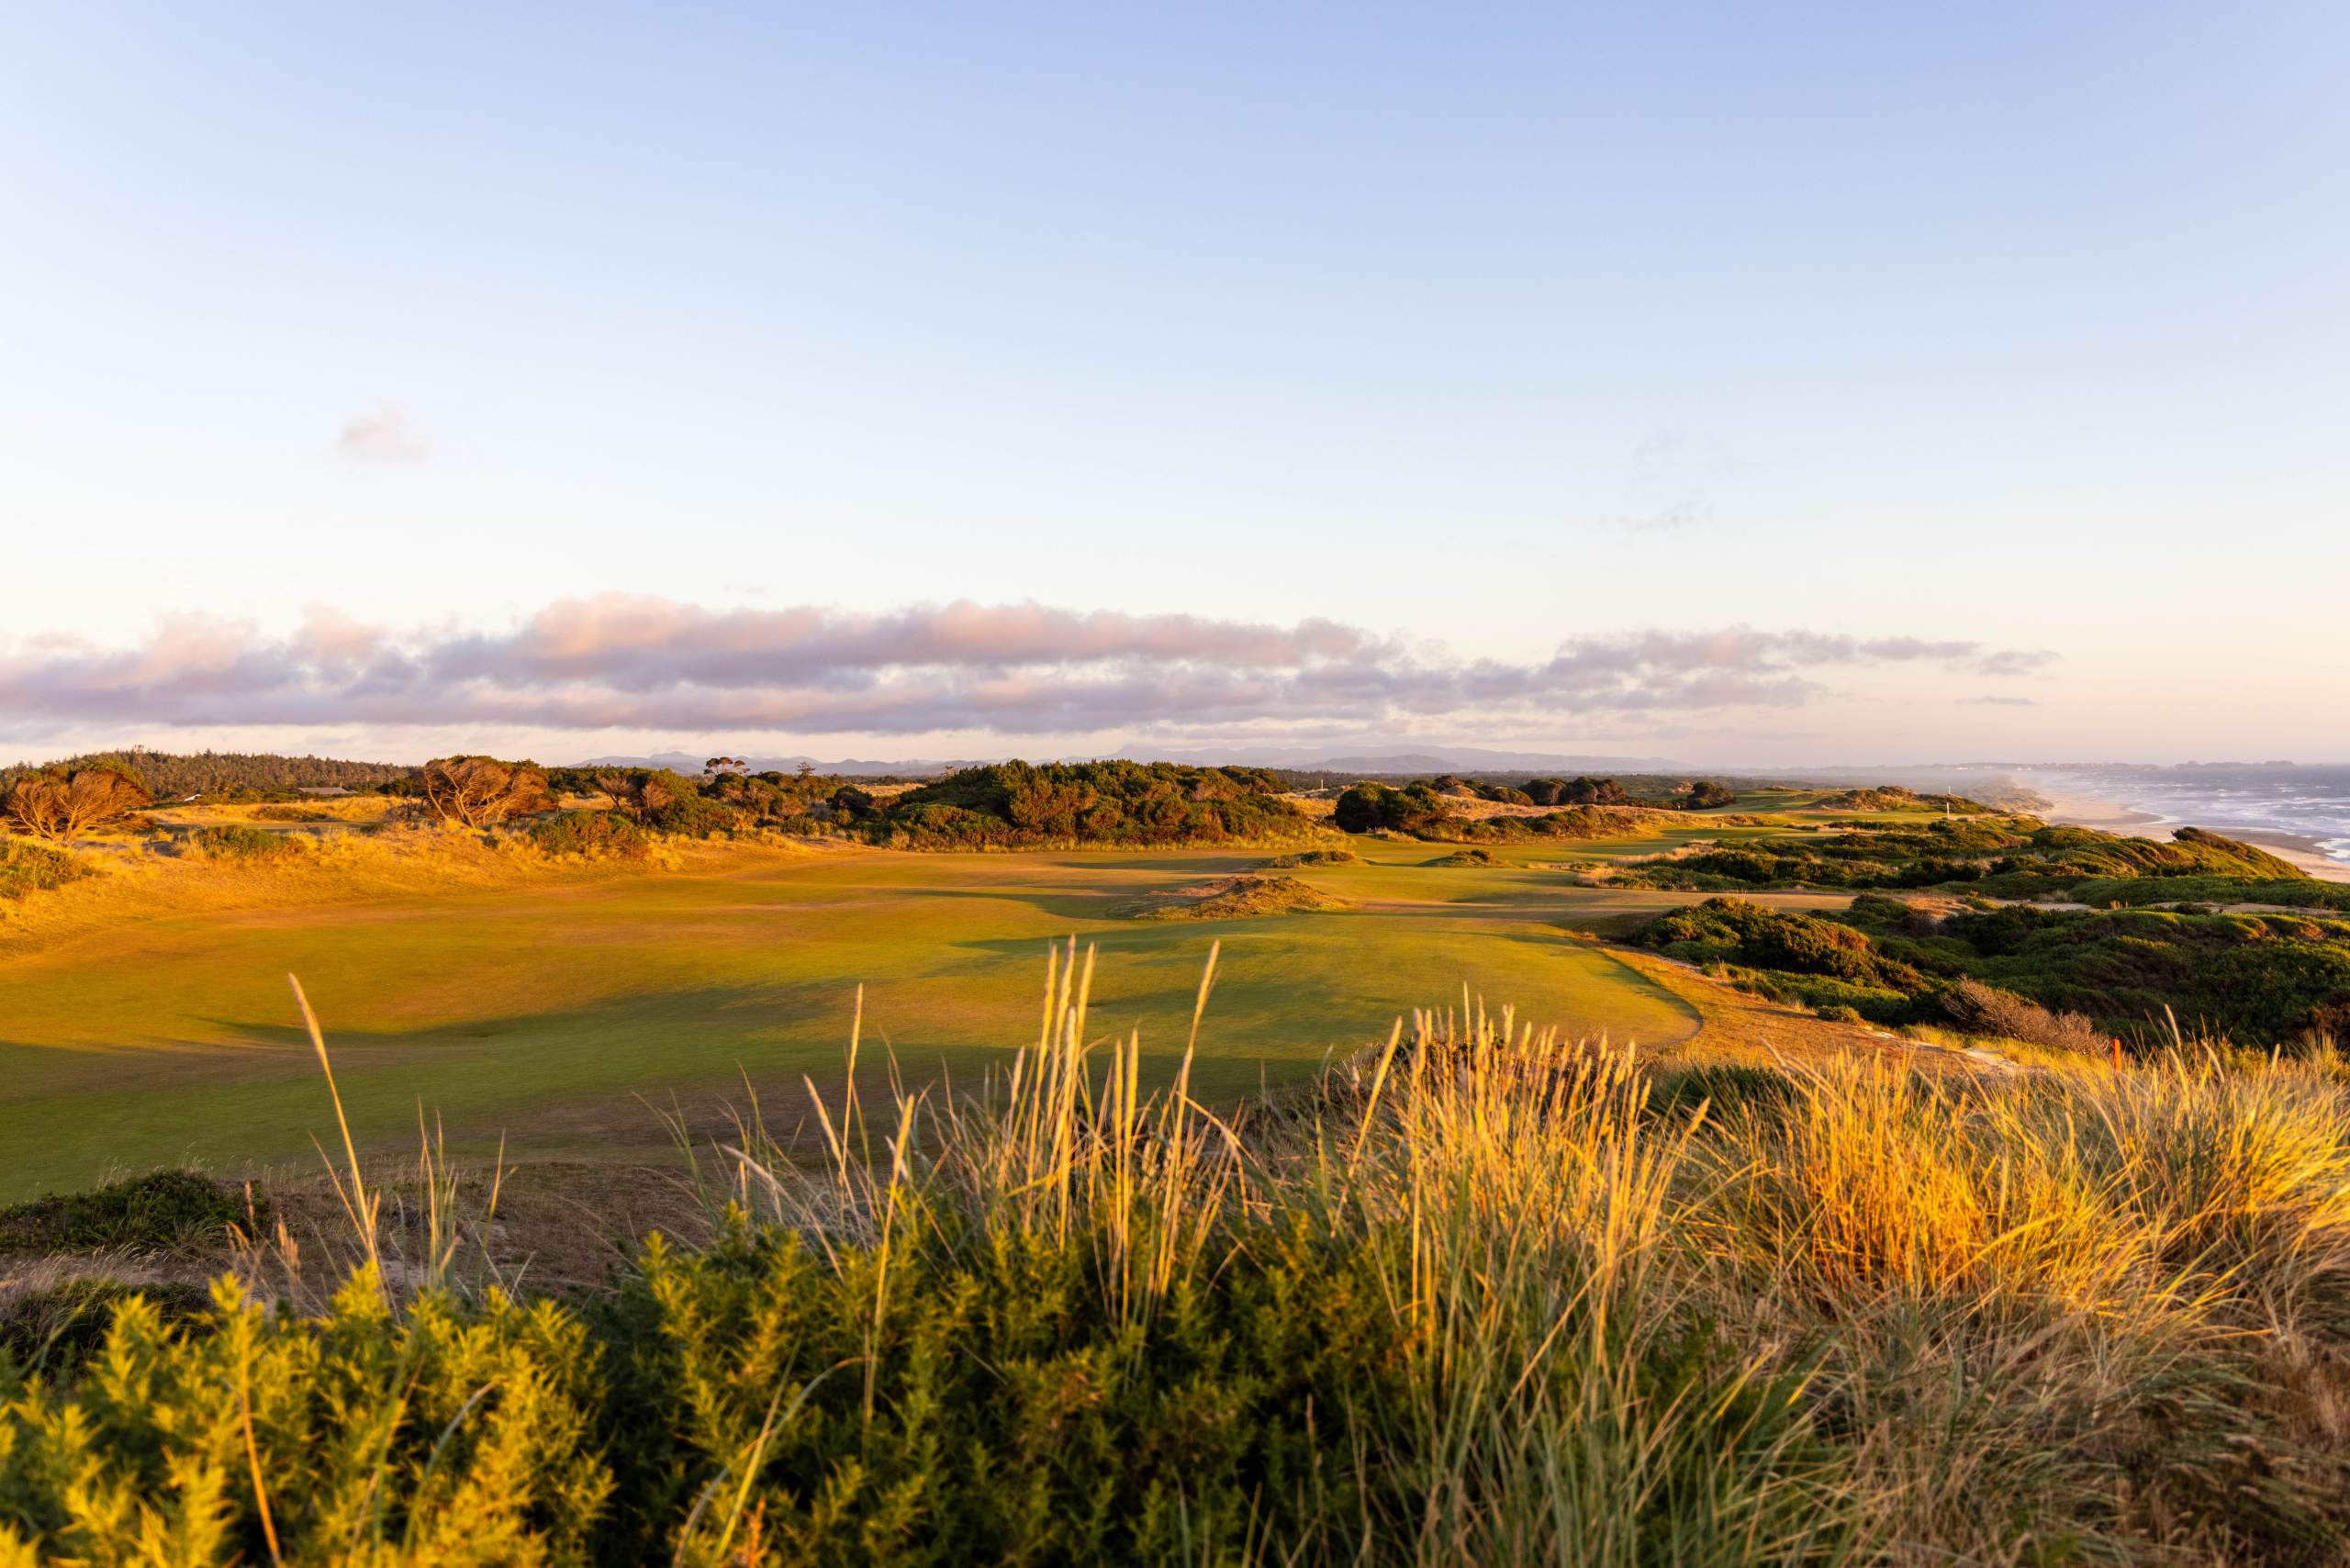 <em><b>Course Location: Bandon, Oregon </b></em> The third course from golf heaven on this list, this is the one that started it all. The saga began in 1999 with the unveiling of Bandon Dunes. Crafted by the visionary Scotsman David McLay Kidd, the course graces a coastal perch, gazing over the majestic Pacific Ocean. Nature's profound influence sculpted the terrain, setting the stage for what would evolve into a golfing masterpiece. The course's layout tantalizes the senses, guiding players through a captivating odyssey that culminates at the heart of the resort. Winding amidst untouched coastal dunes, the journey unfolds, offering glimpses of vast ocean vistas at every turn. This course is very strategy-based-- winds are ever-present, and the varying elements create a new experience each time you play.